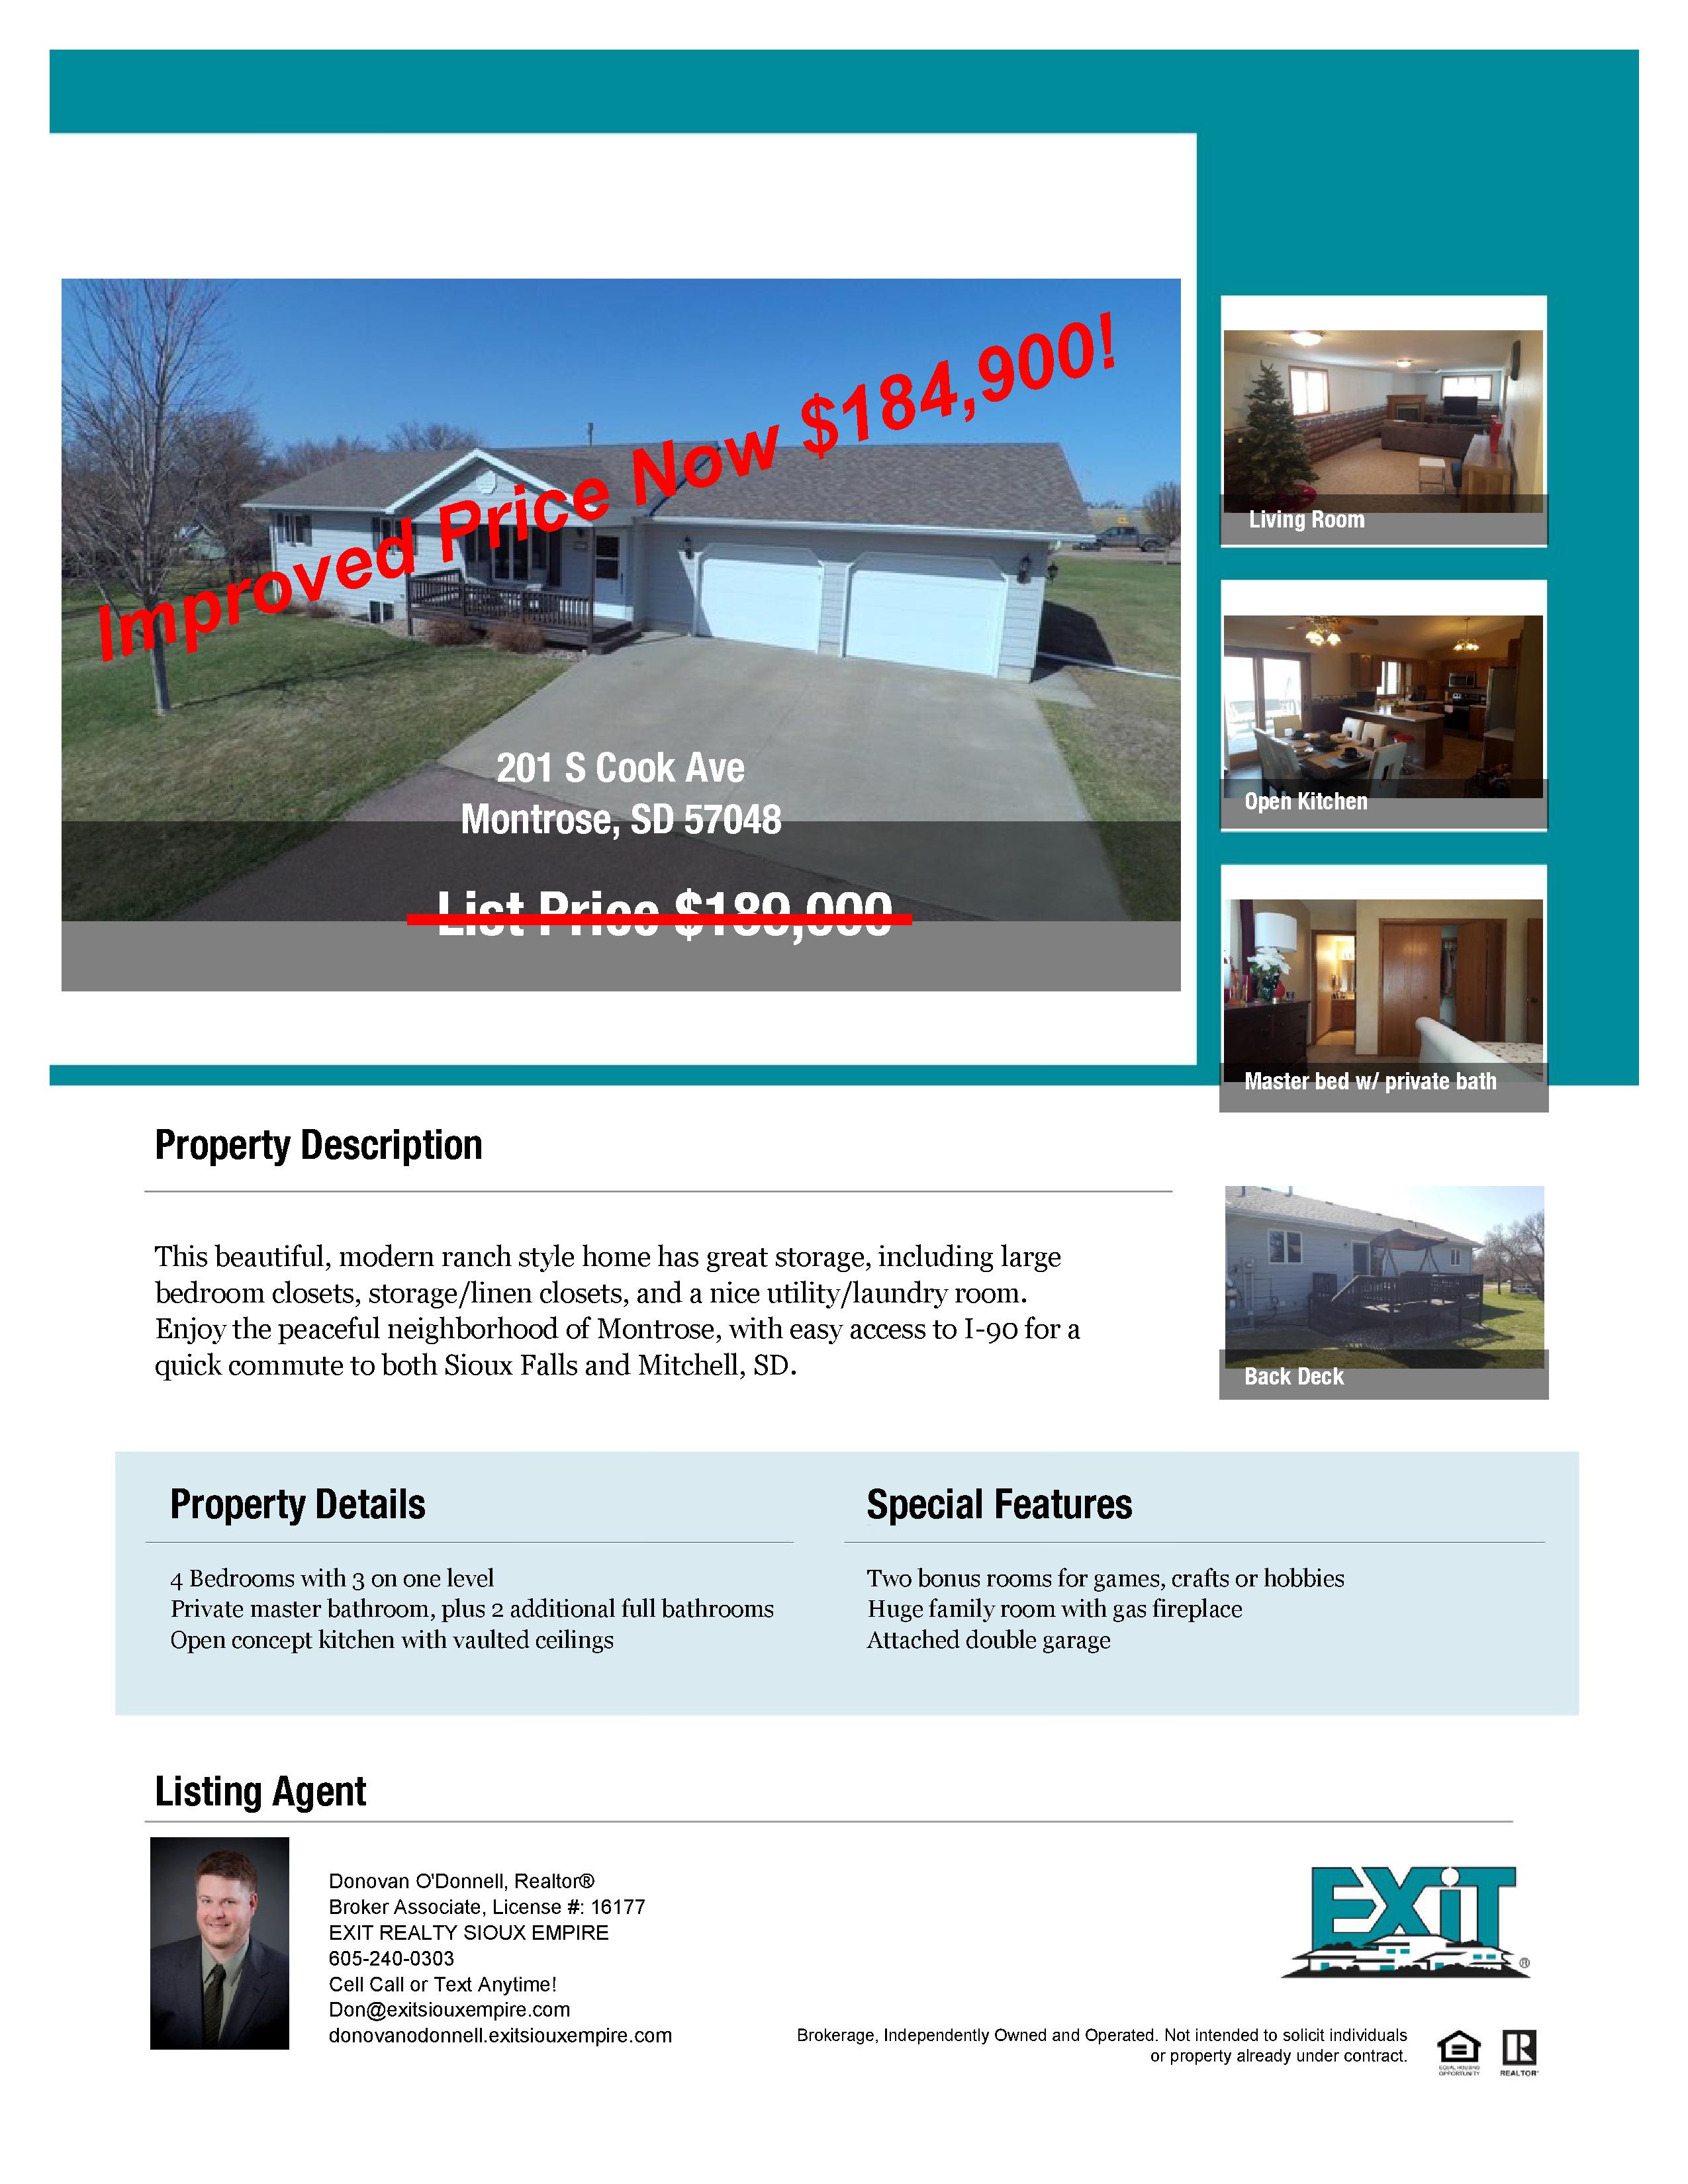 Improved pricing on 201 S. Cook Ave, Montrose, SD 57048!